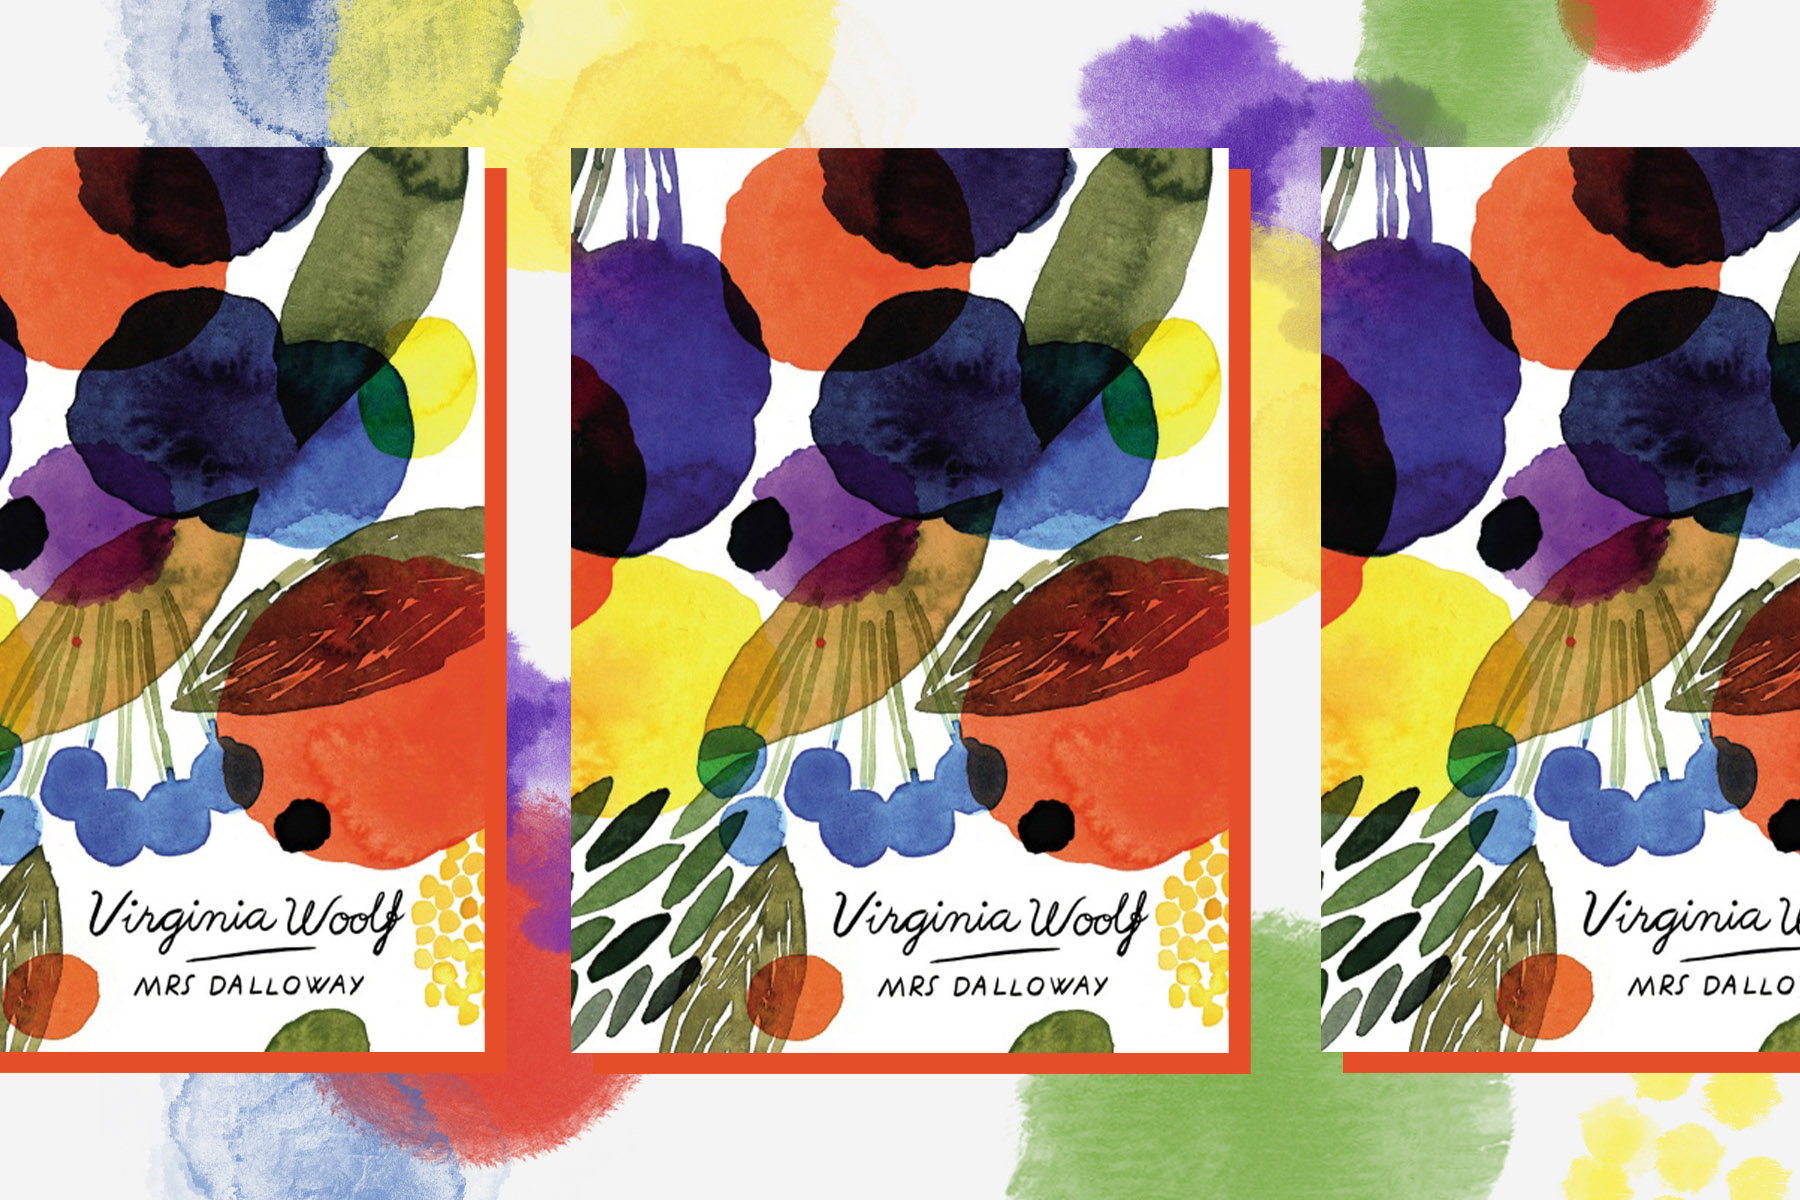 Three copies of Mrs Dalloway on a background that replicates the cover's vivid watercolour splotches.